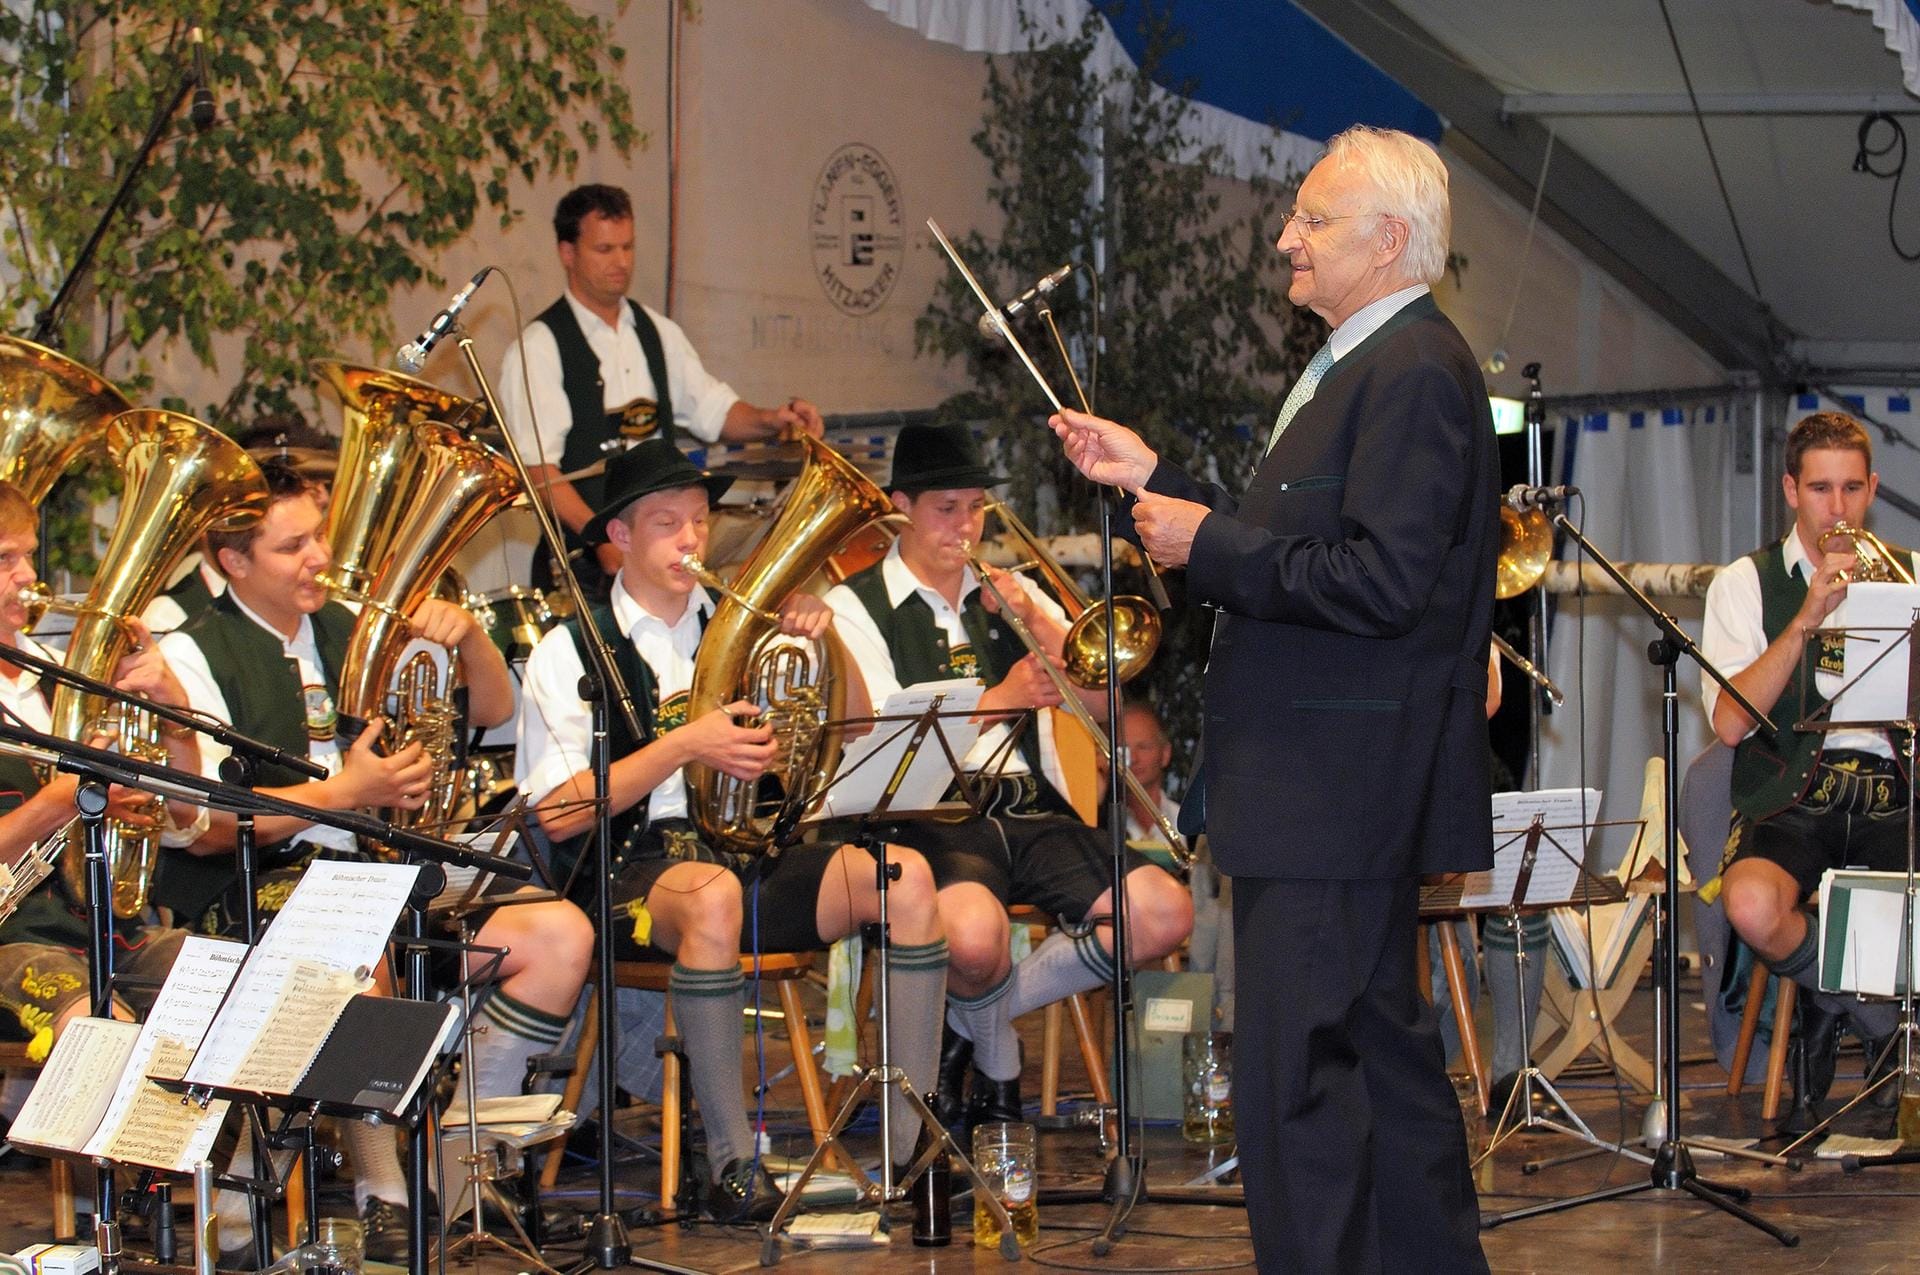 Dr. Edmund Stoiber conducting a brass band, beer tent, Grosshoehenrain, Upper Bavaria, Bavaria, Germany, Europe